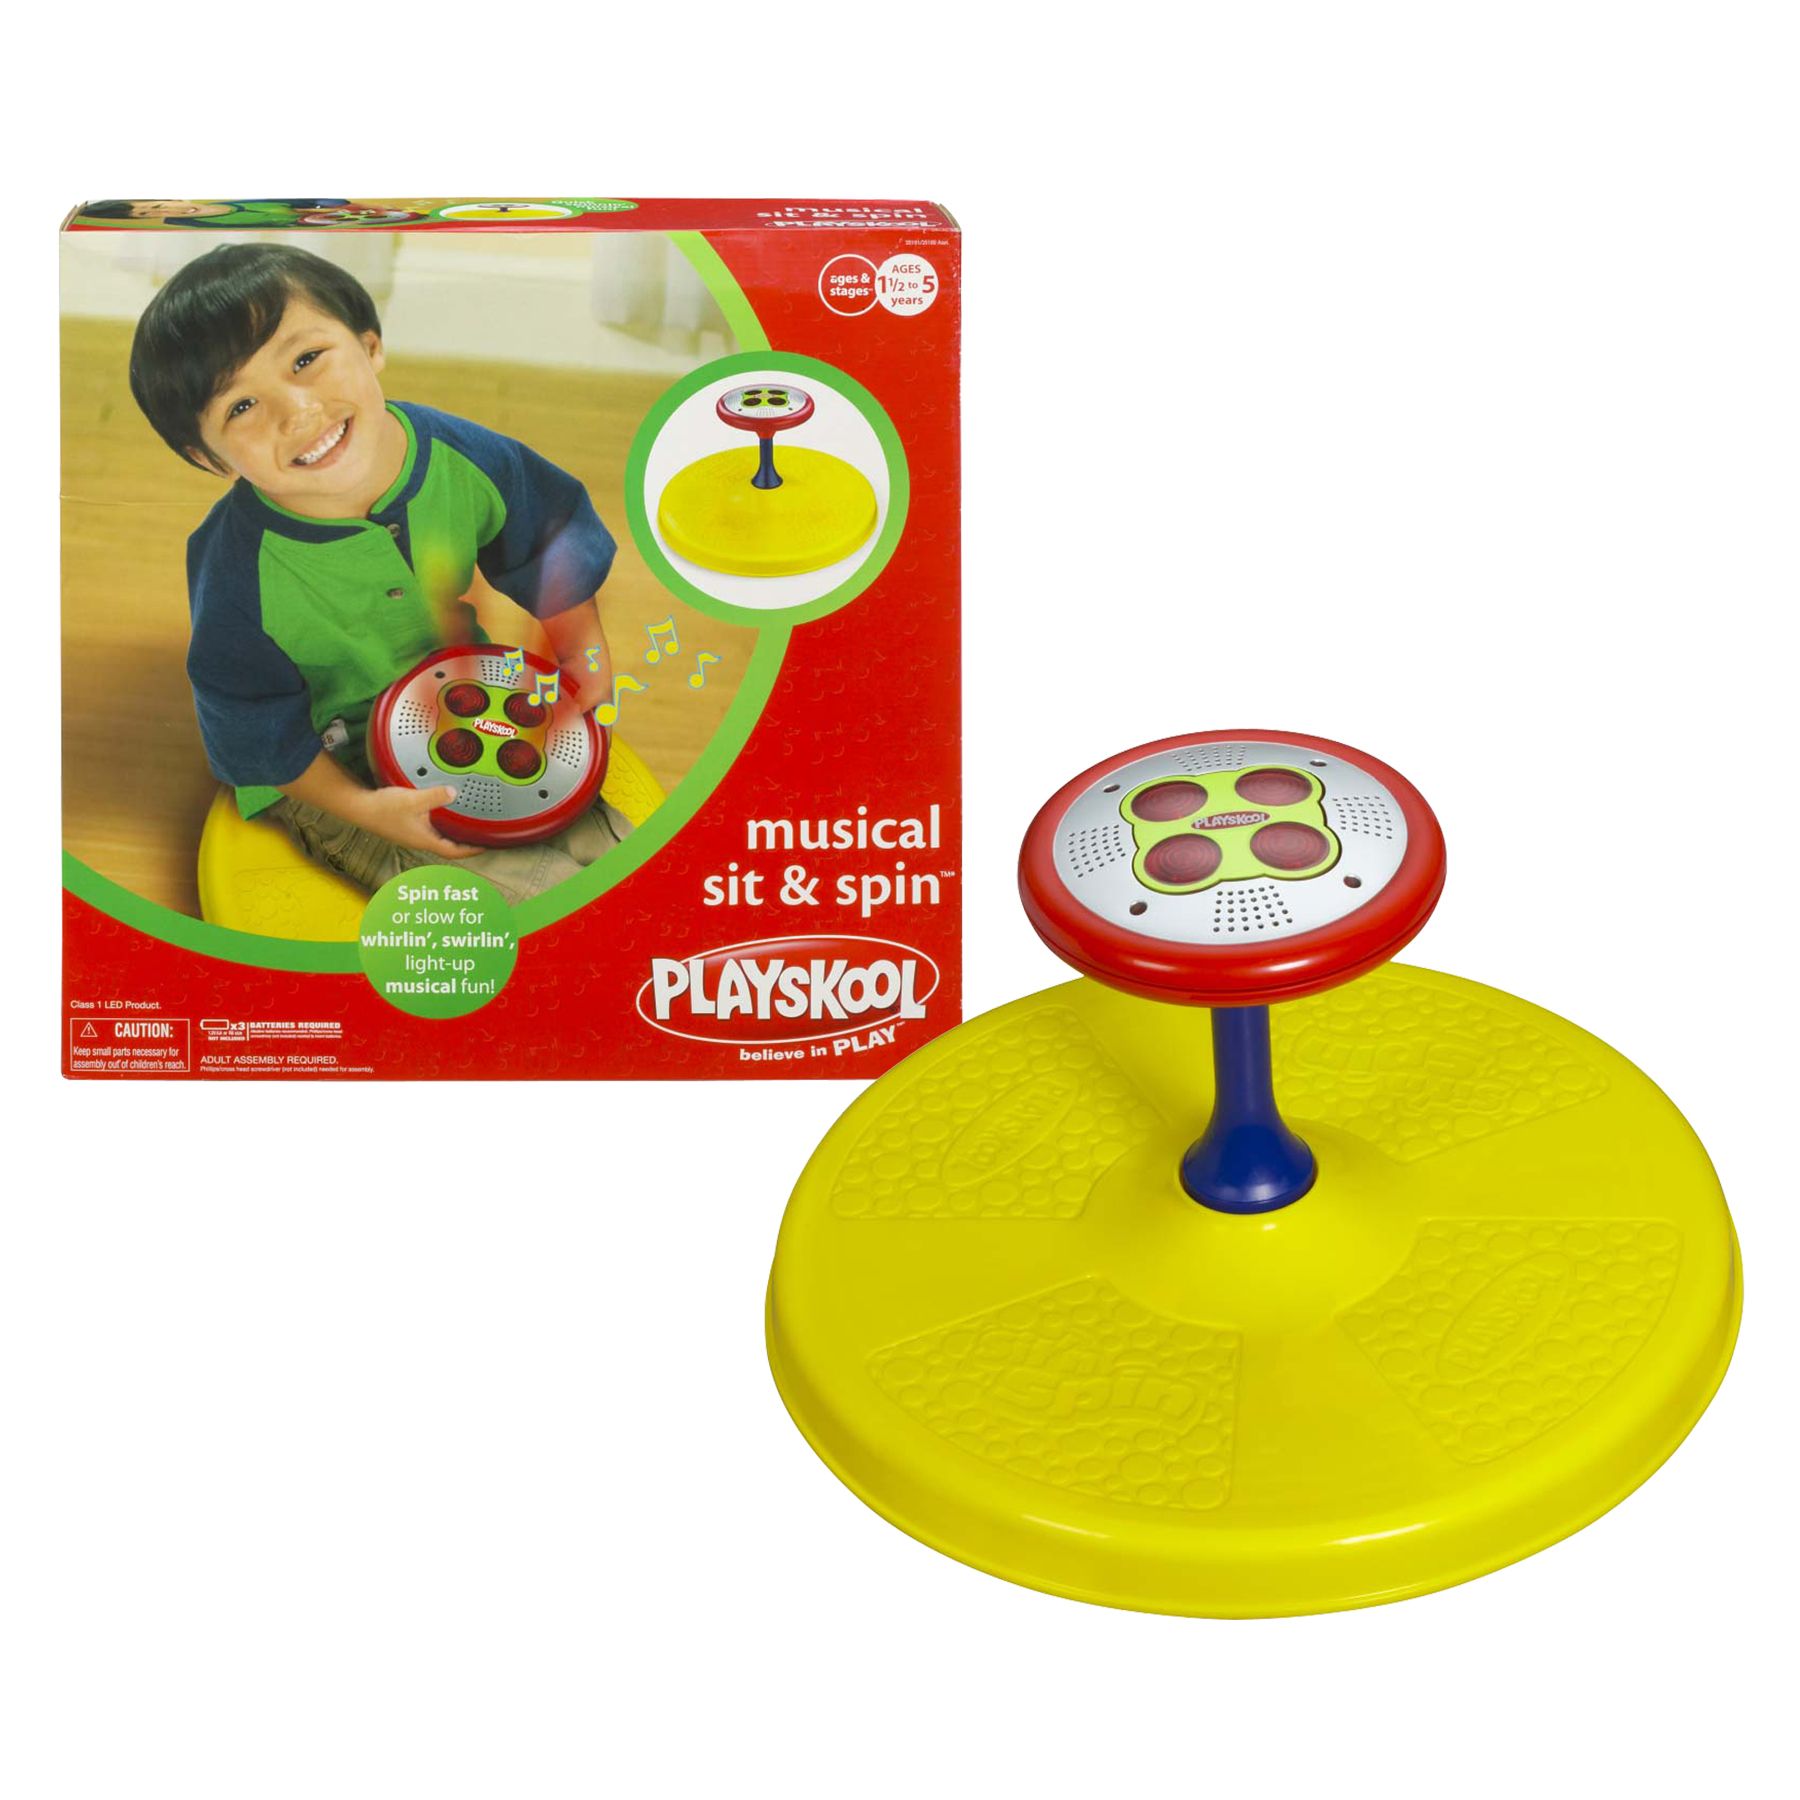 Play And Spin